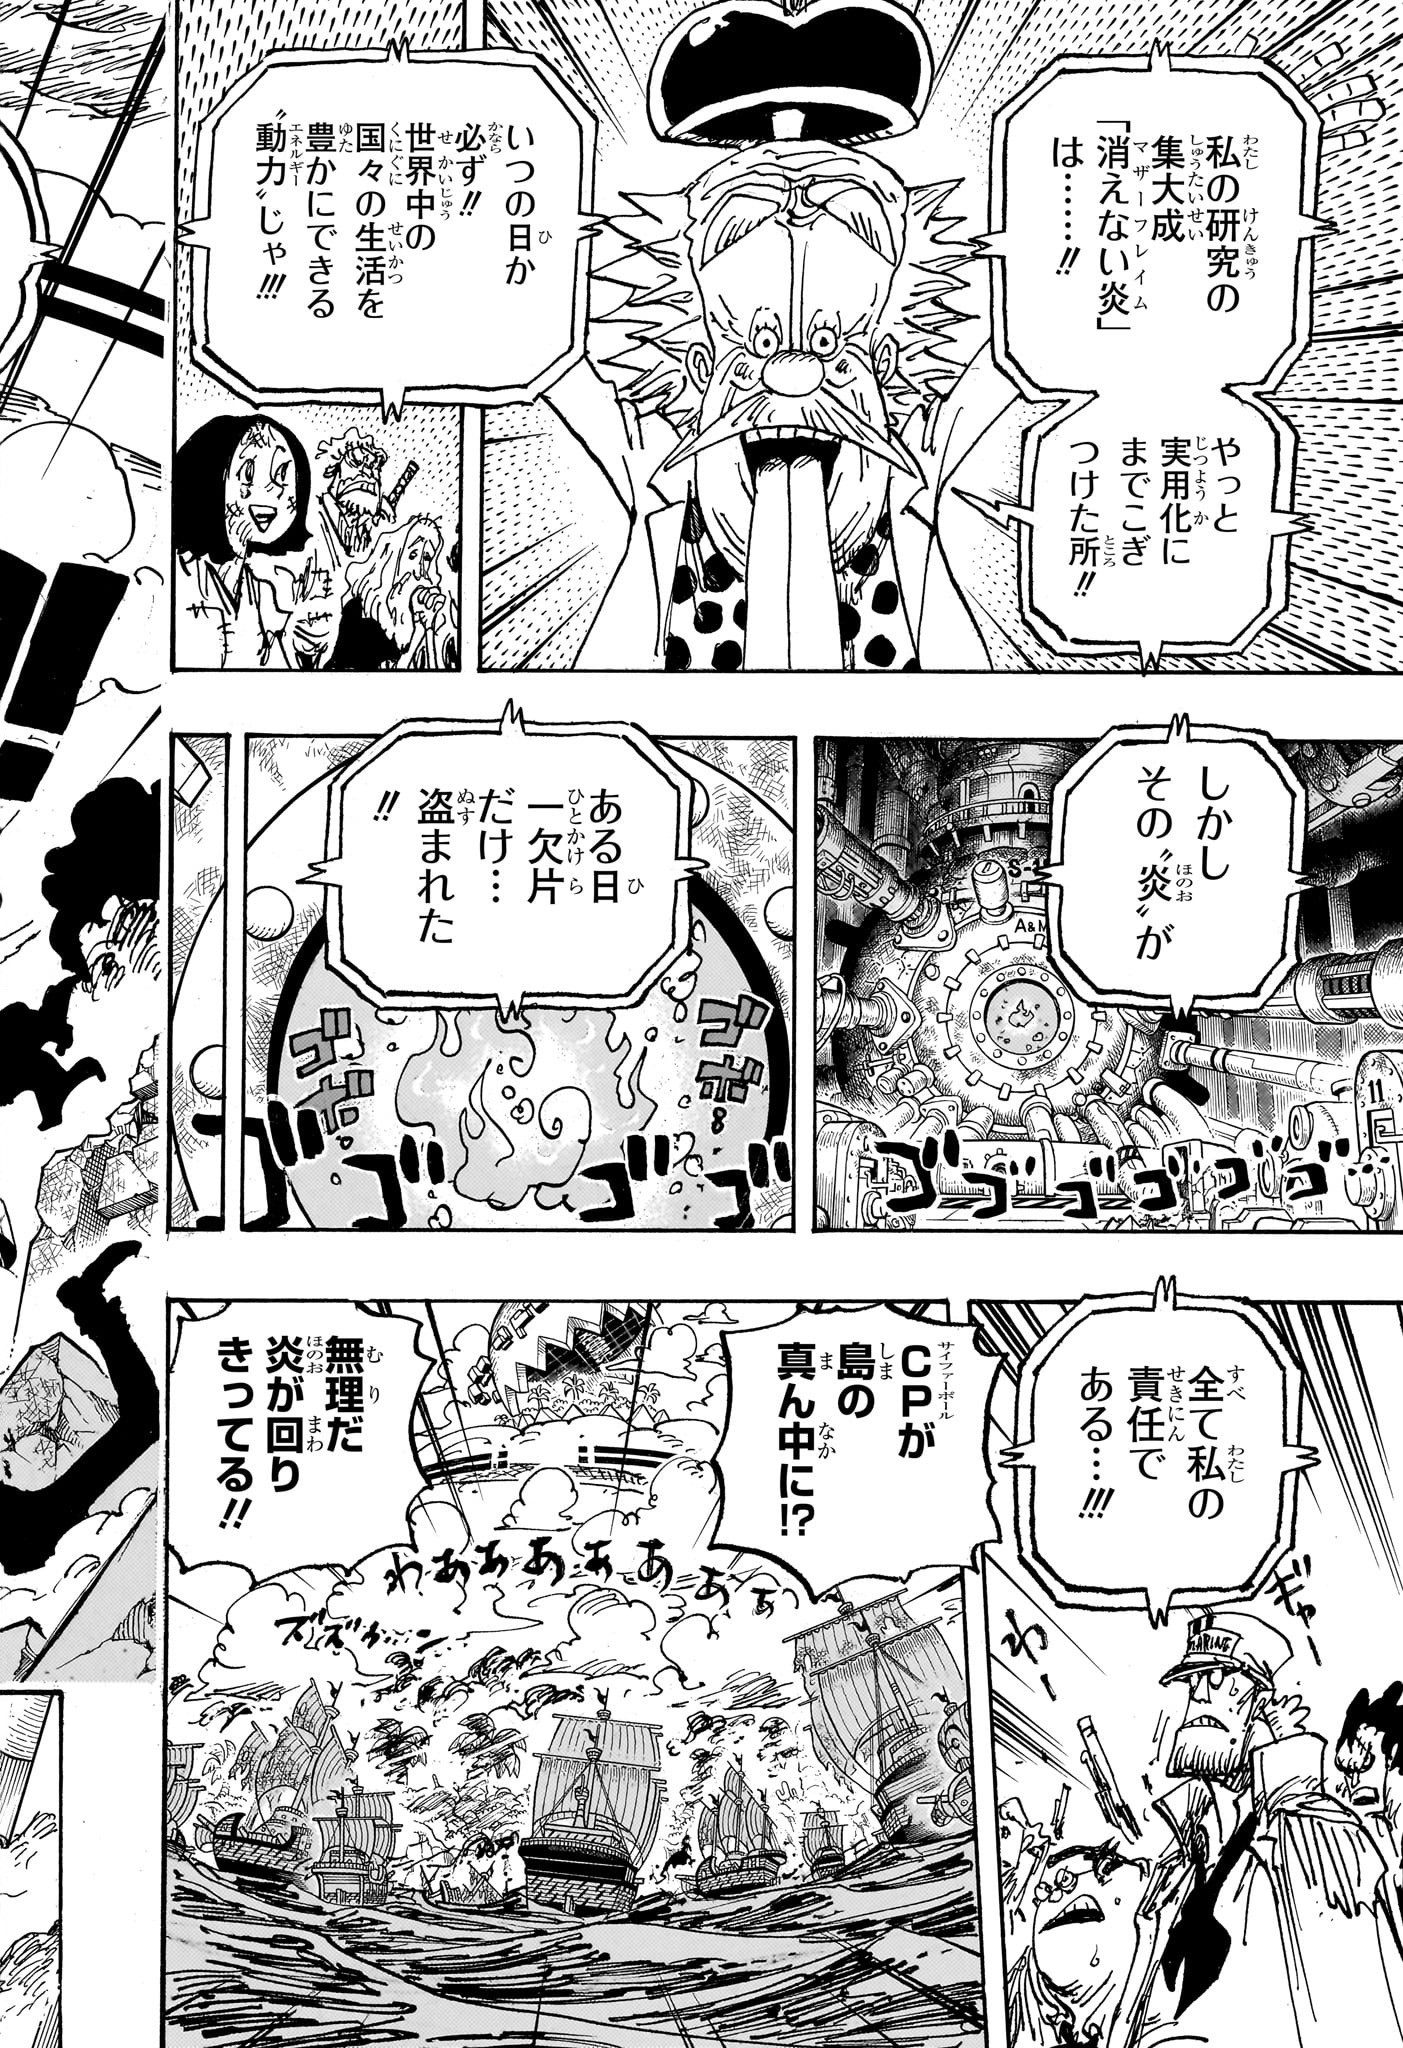 One Piece - Chapter 1116 - Page 4